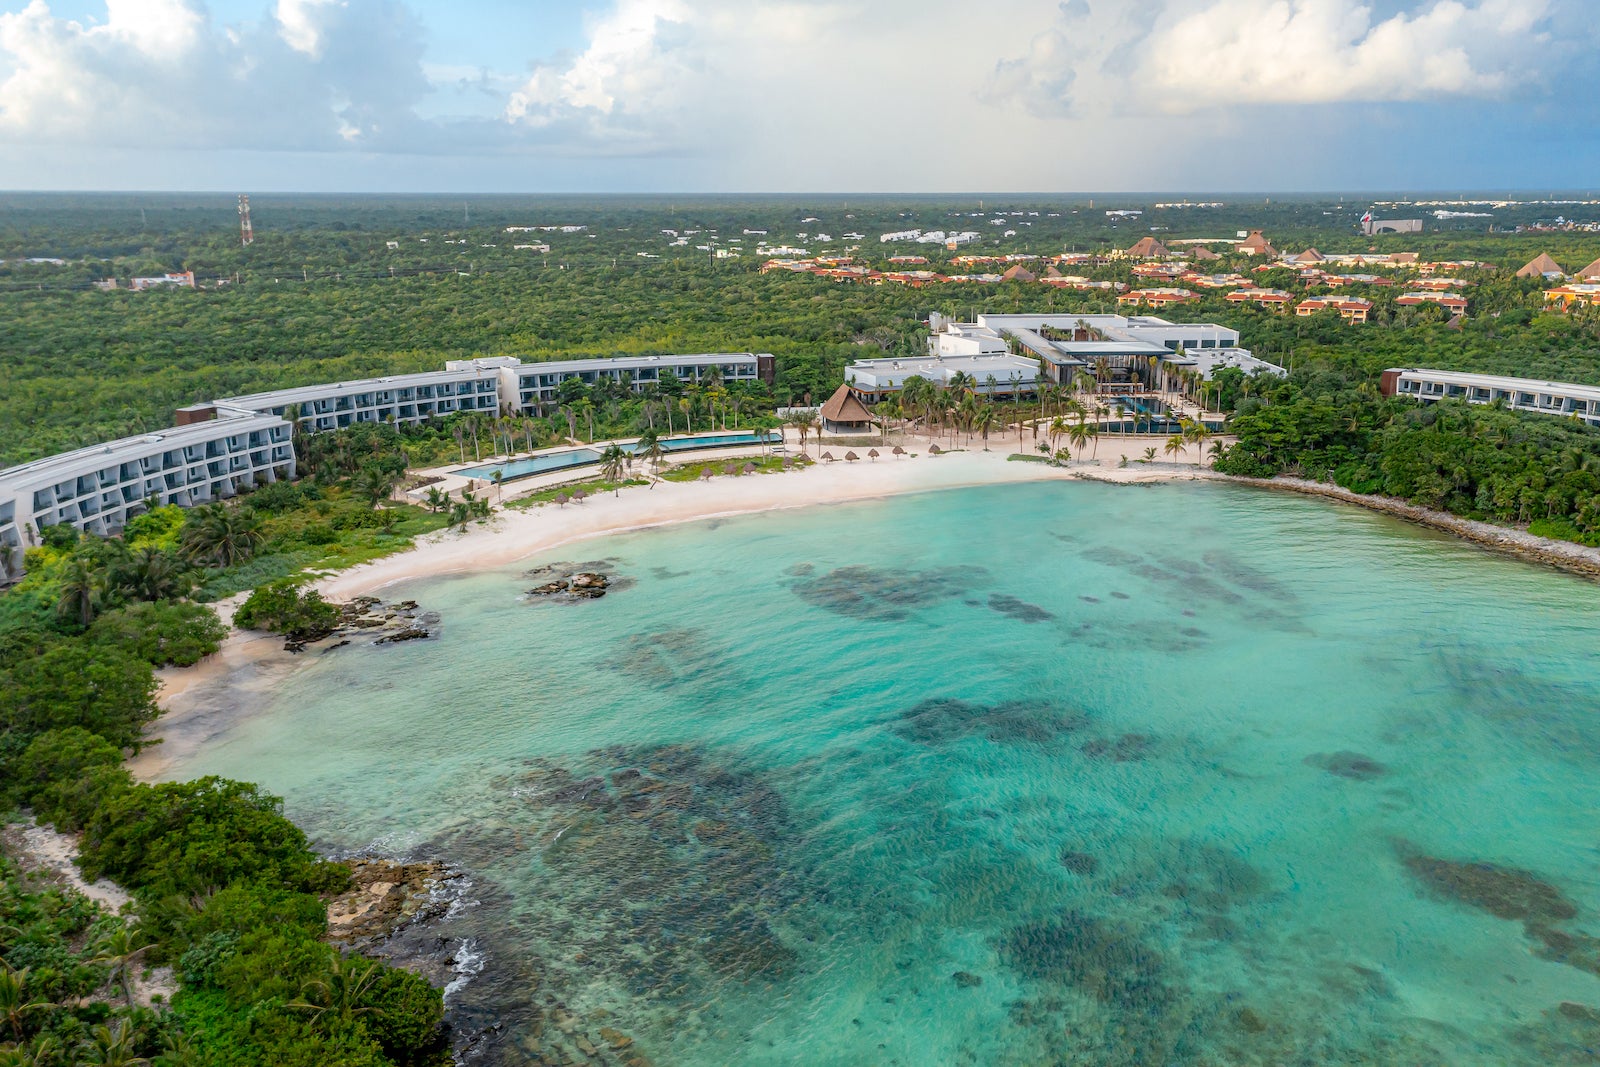 Aerial photo of large white resort surrounded by bay with turquoise water